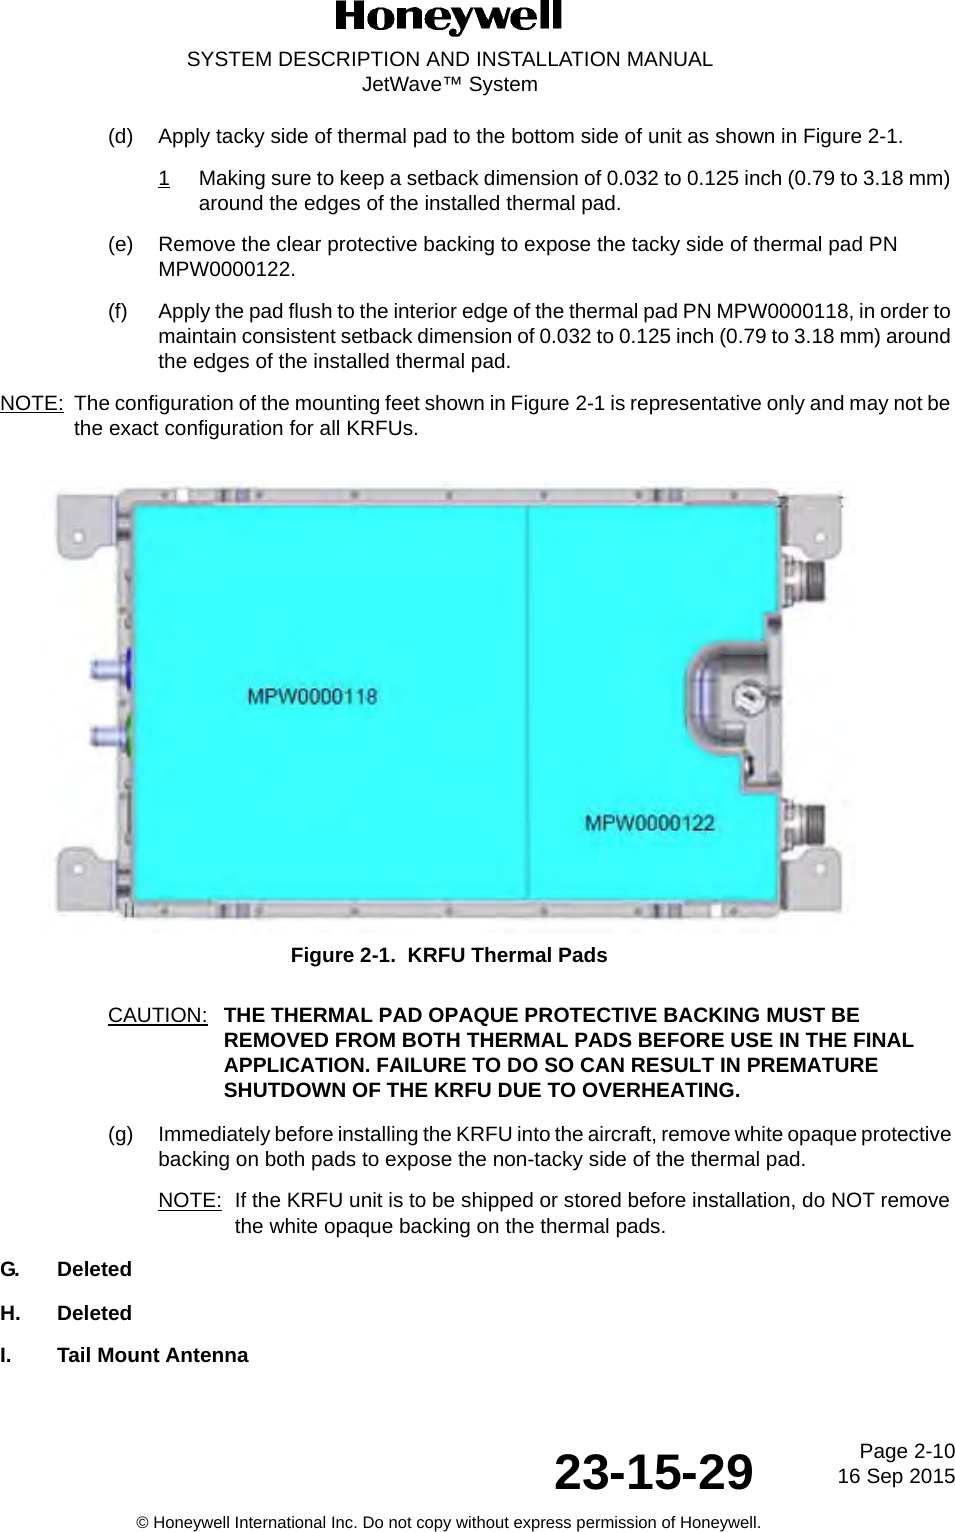 Page 2-10 16 Sep 201523-15-29SYSTEM DESCRIPTION AND INSTALLATION MANUALJetWave™ System© Honeywell International Inc. Do not copy without express permission of Honeywell.(d) Apply tacky side of thermal pad to the bottom side of unit as shown in Figure 2-1.1Making sure to keep a setback dimension of 0.032 to 0.125 inch (0.79 to 3.18 mm) around the edges of the installed thermal pad. (e) Remove the clear protective backing to expose the tacky side of thermal pad PN MPW0000122. (f) Apply the pad flush to the interior edge of the thermal pad PN MPW0000118, in order to maintain consistent setback dimension of 0.032 to 0.125 inch (0.79 to 3.18 mm) around the edges of the installed thermal pad. NOTE: The configuration of the mounting feet shown in Figure 2-1 is representative only and may not be the exact configuration for all KRFUs. Figure 2-1.  KRFU Thermal PadsCAUTION: THE THERMAL PAD OPAQUE PROTECTIVE BACKING MUST BE REMOVED FROM BOTH THERMAL PADS BEFORE USE IN THE FINAL APPLICATION. FAILURE TO DO SO CAN RESULT IN PREMATURE SHUTDOWN OF THE KRFU DUE TO OVERHEATING. (g) Immediately before installing the KRFU into the aircraft, remove white opaque protective backing on both pads to expose the non-tacky side of the thermal pad. NOTE: If the KRFU unit is to be shipped or stored before installation, do NOT remove the white opaque backing on the thermal pads. G. DeletedH. DeletedI. Tail Mount Antenna 